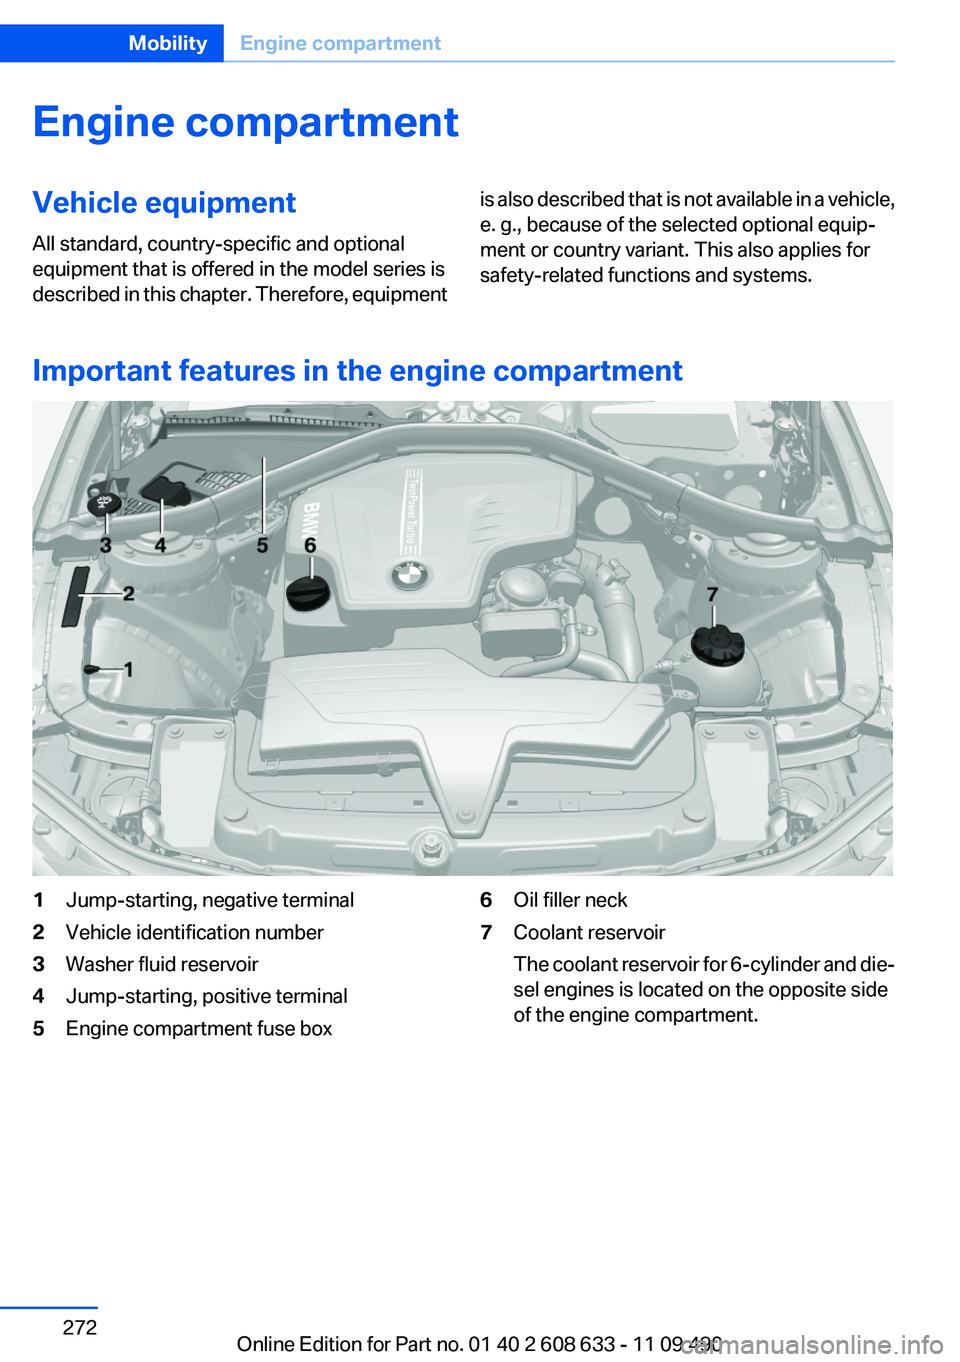 BMW 3 SERIES 2011  Owners Manual Engine compartment
Vehicle equipment
All standard, country-specific and optional
equipment that is offered in the model series is
described in this chapter. Therefore, equipment
is also described that